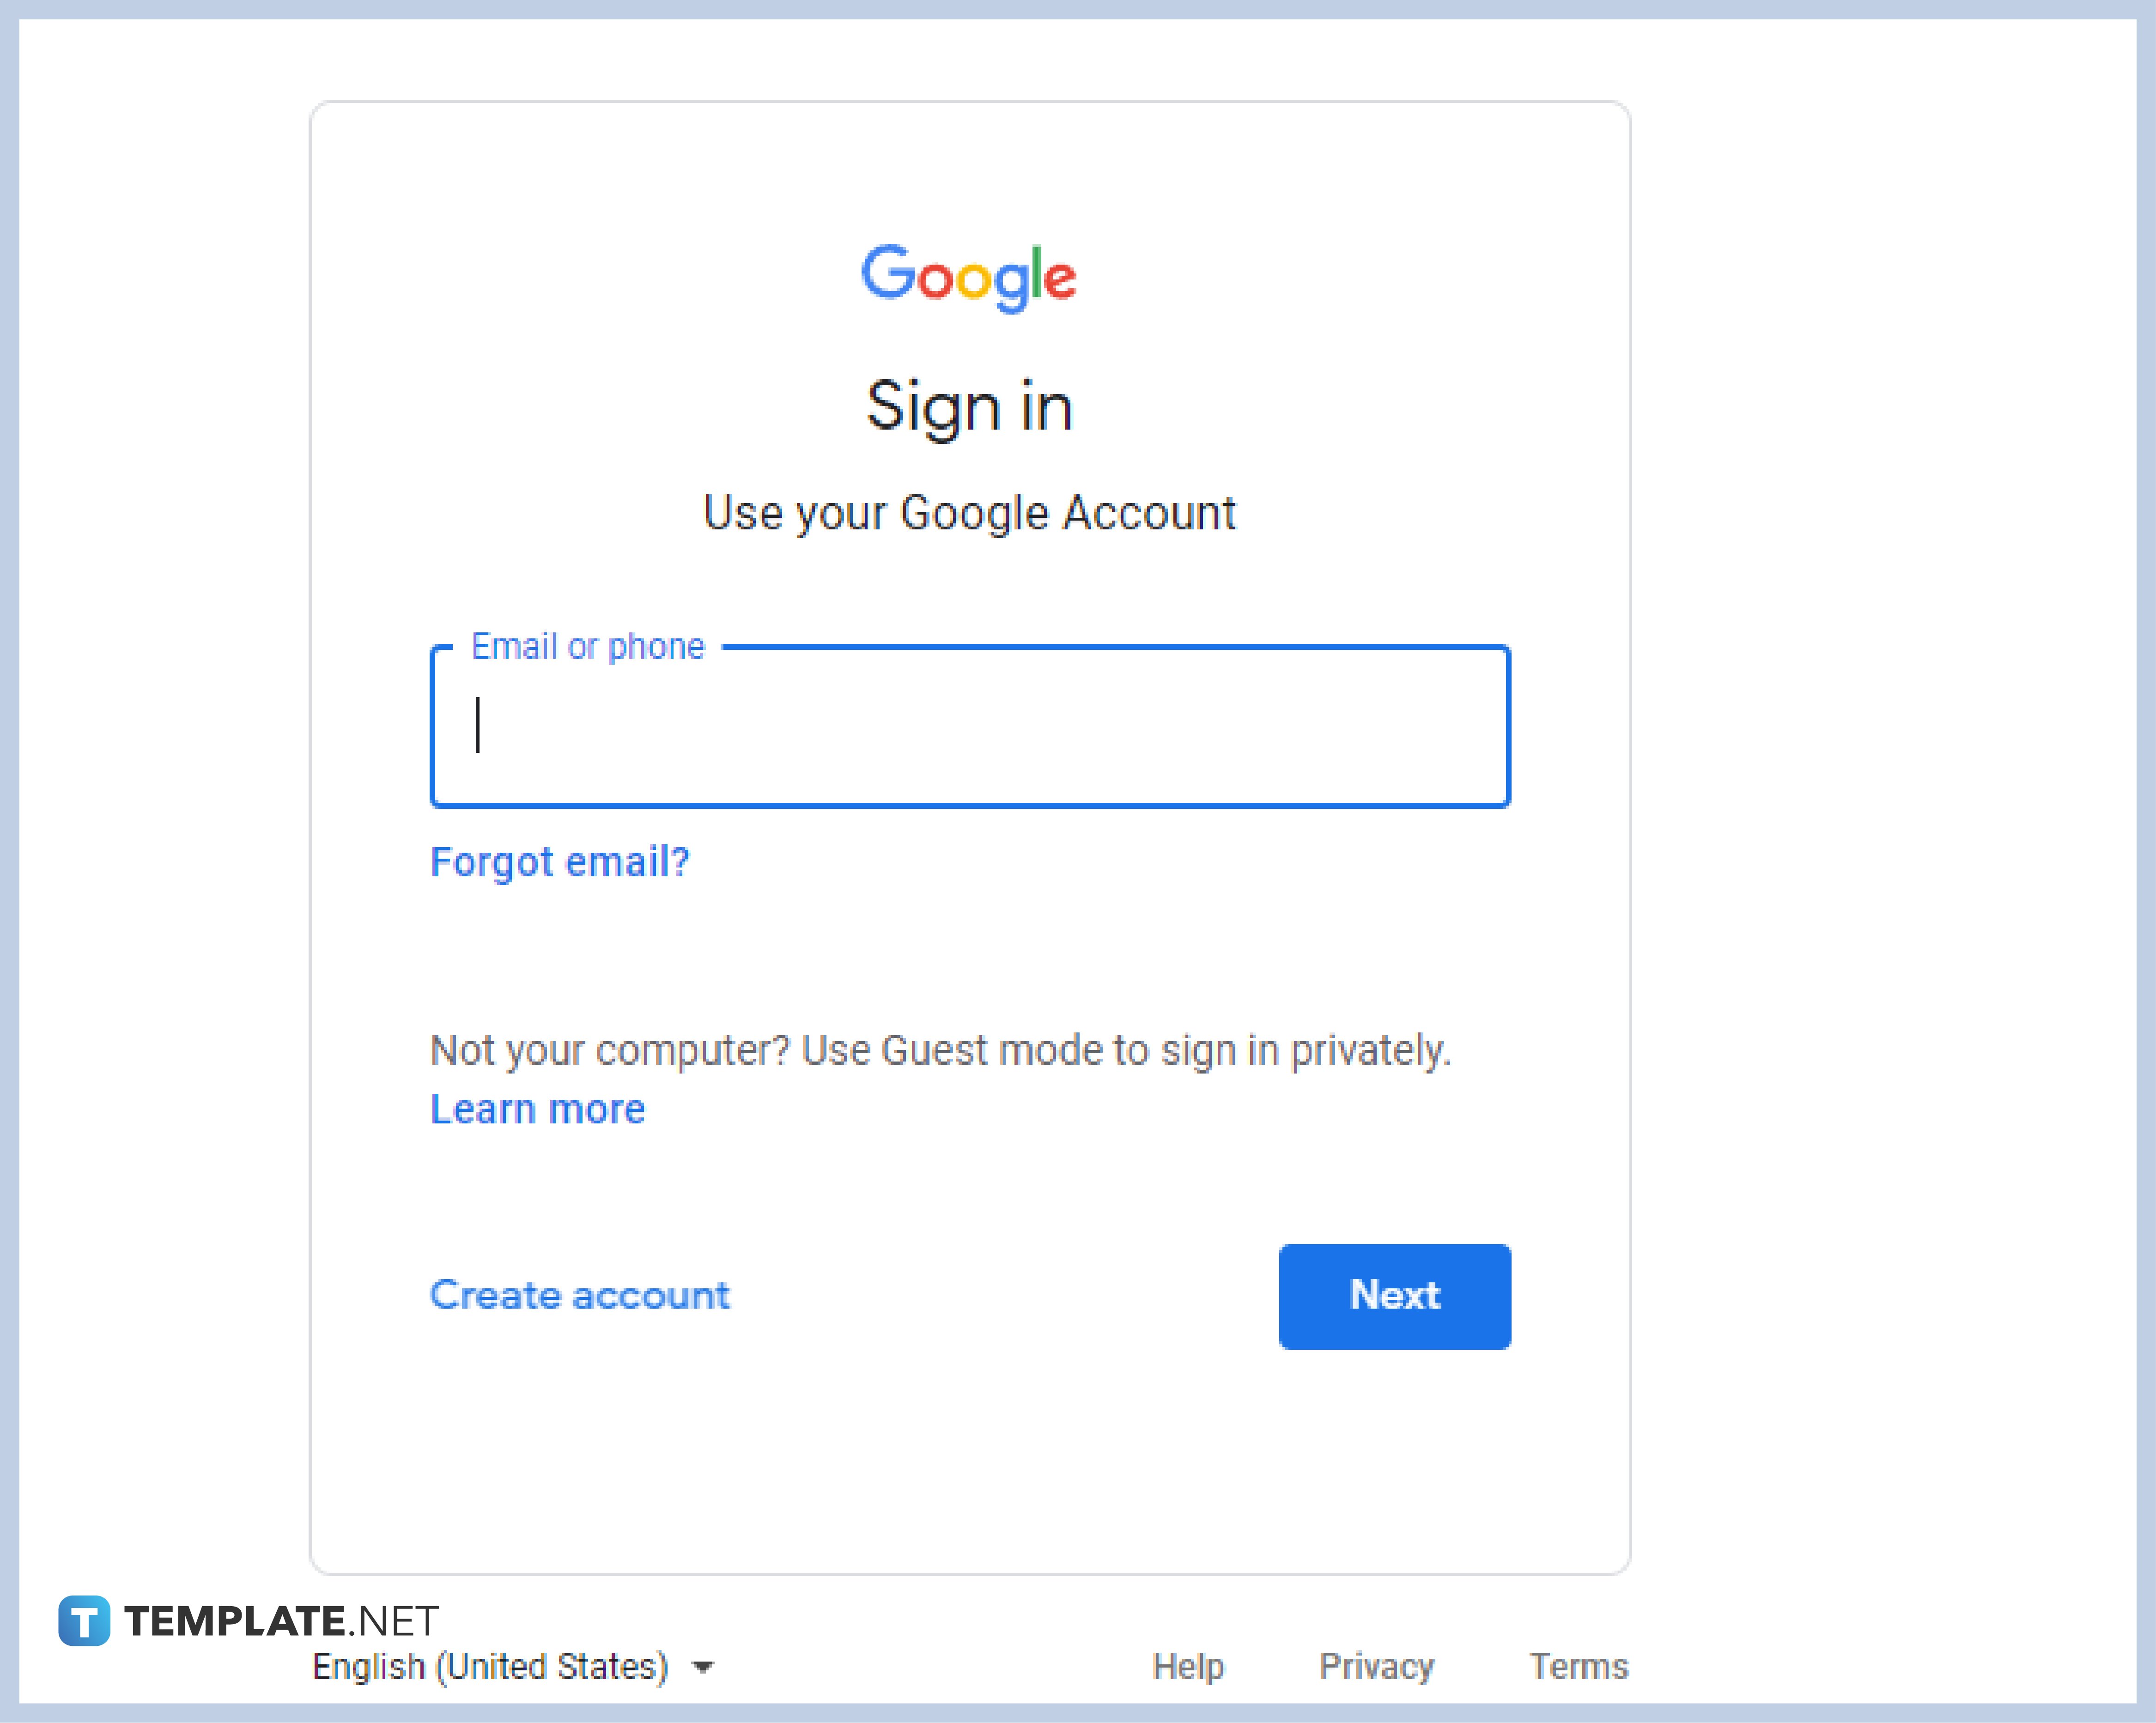 step-1-sign-in-with-your-account-0117